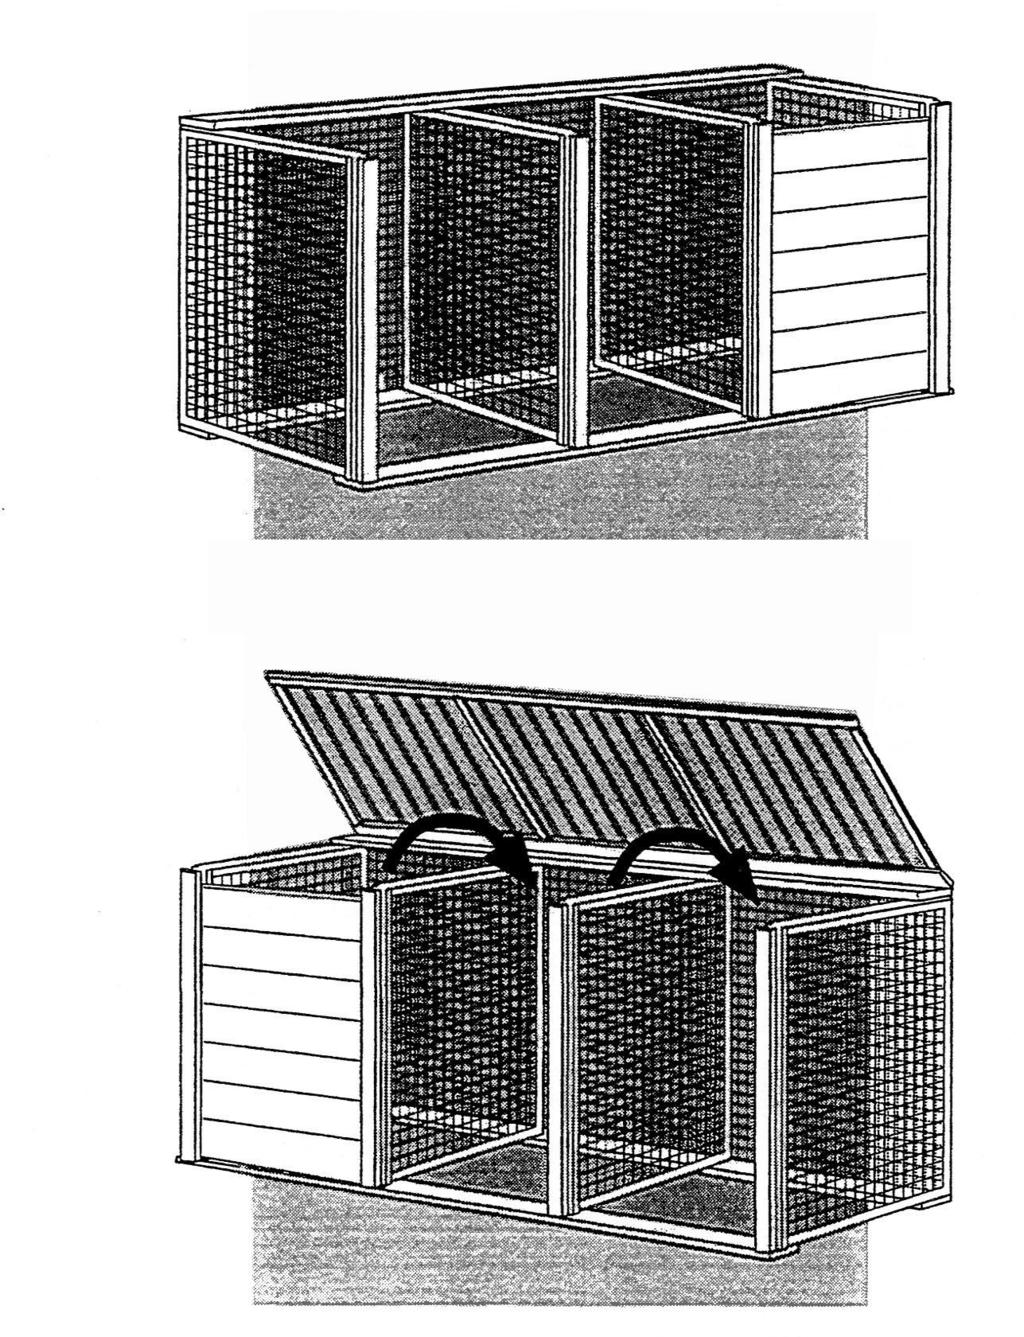 Compost containment Three-Bin Composter Three-Bin Composter with Lid overall dimensions, 4 high x 3